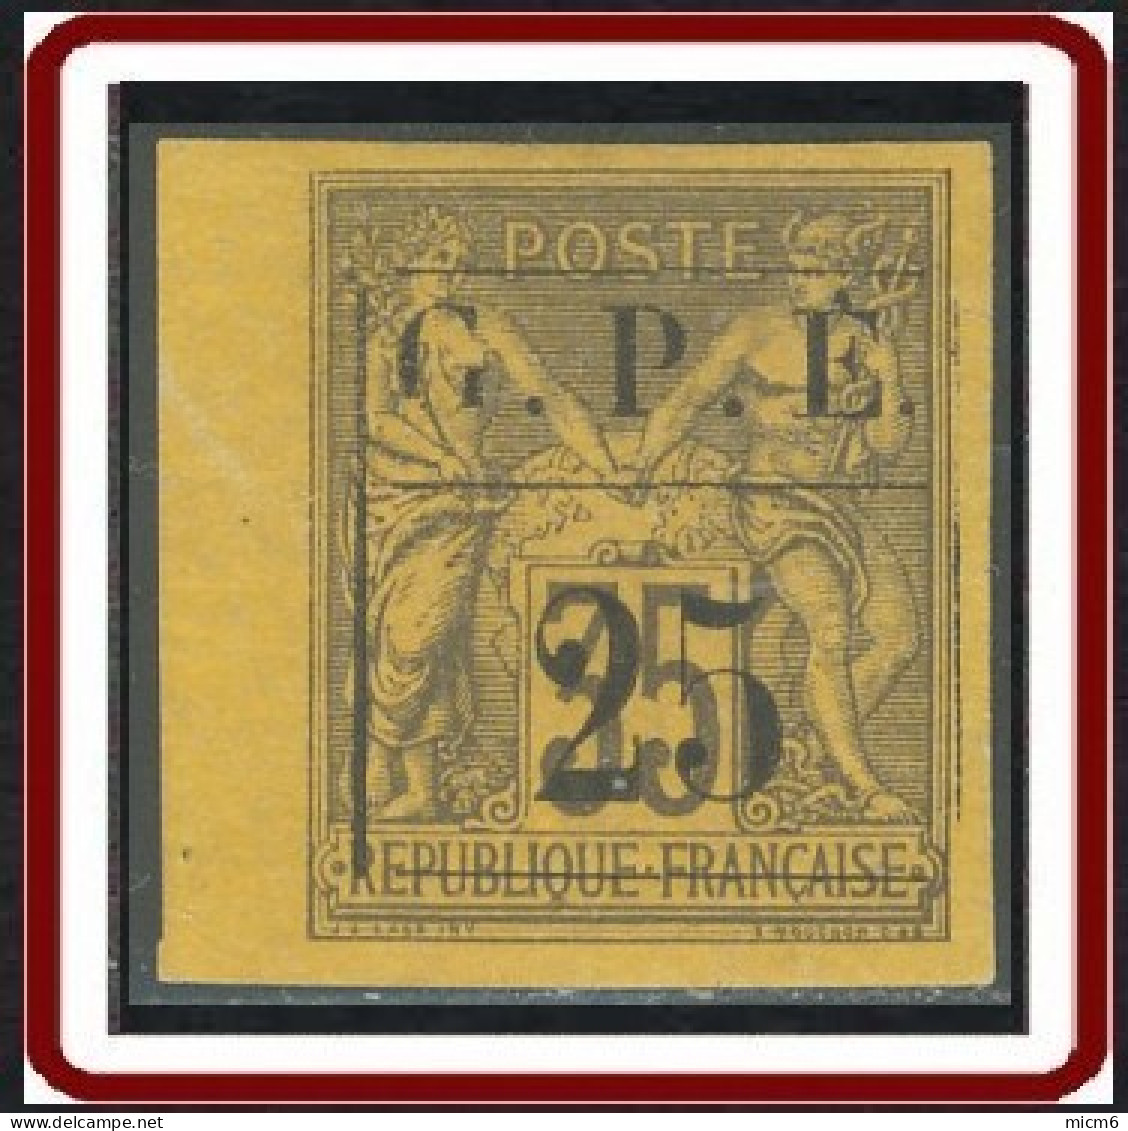 Guadeloupe 1876-1903 - N° 02c (YT) N° 2c (AM) Neuf (*). Accent Grave Sur E (case 11). - Unused Stamps